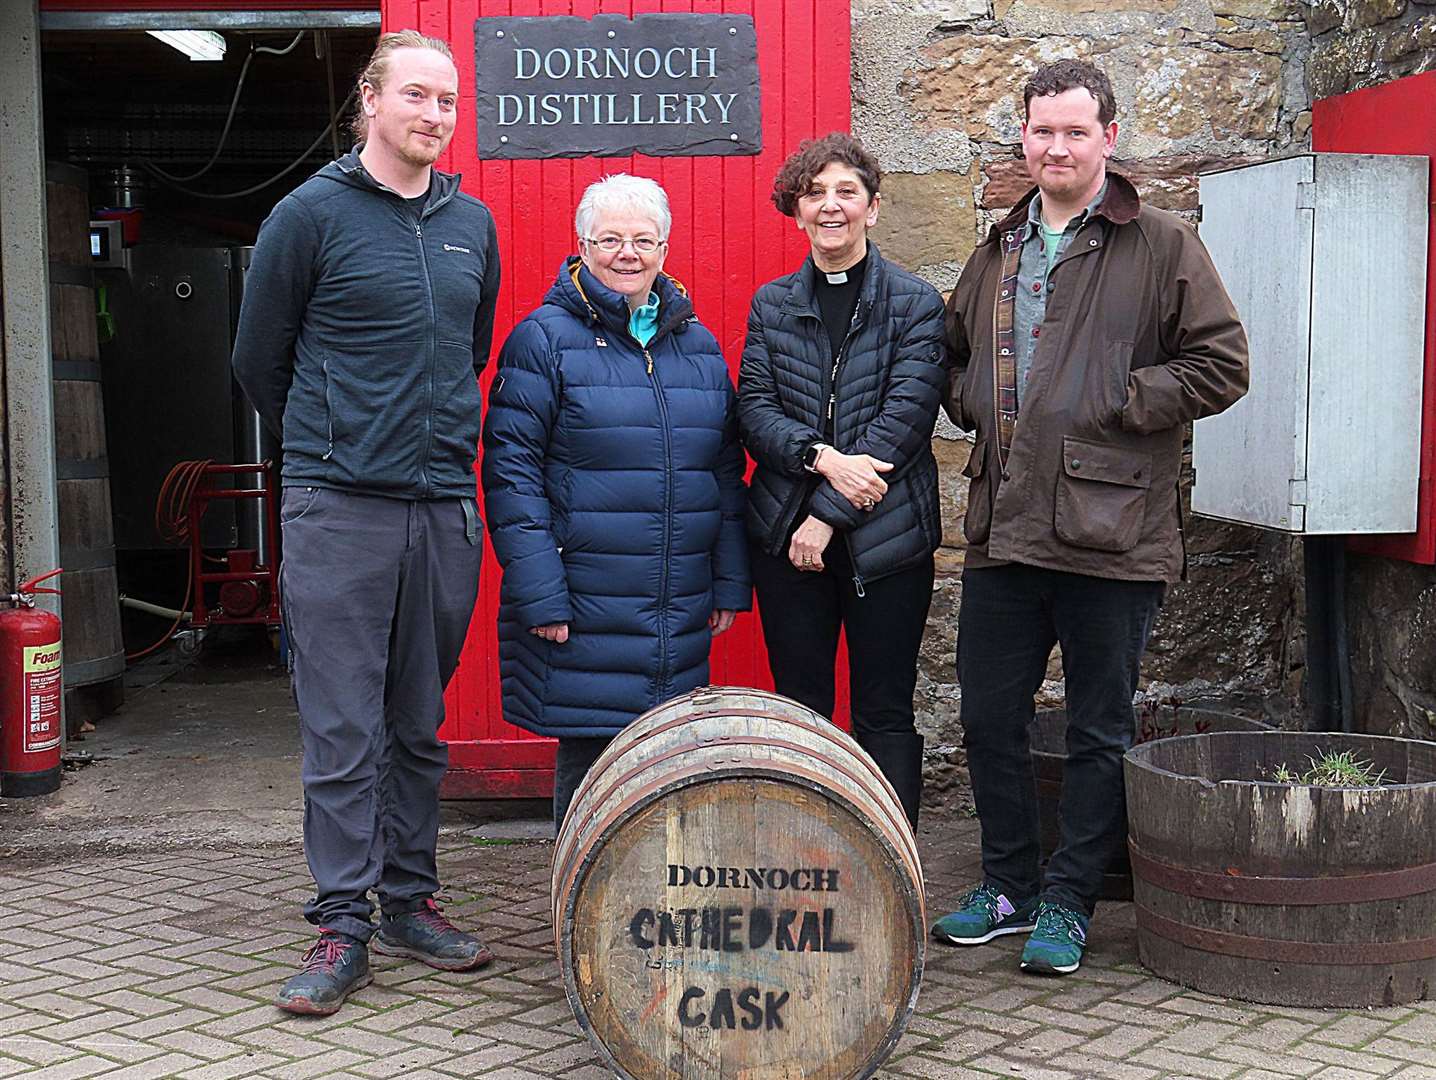 On Monday, the Moderator attended Dornoch Distillery to witness the setting aside of a cask of whisky, to be named Cathedral Spirit.